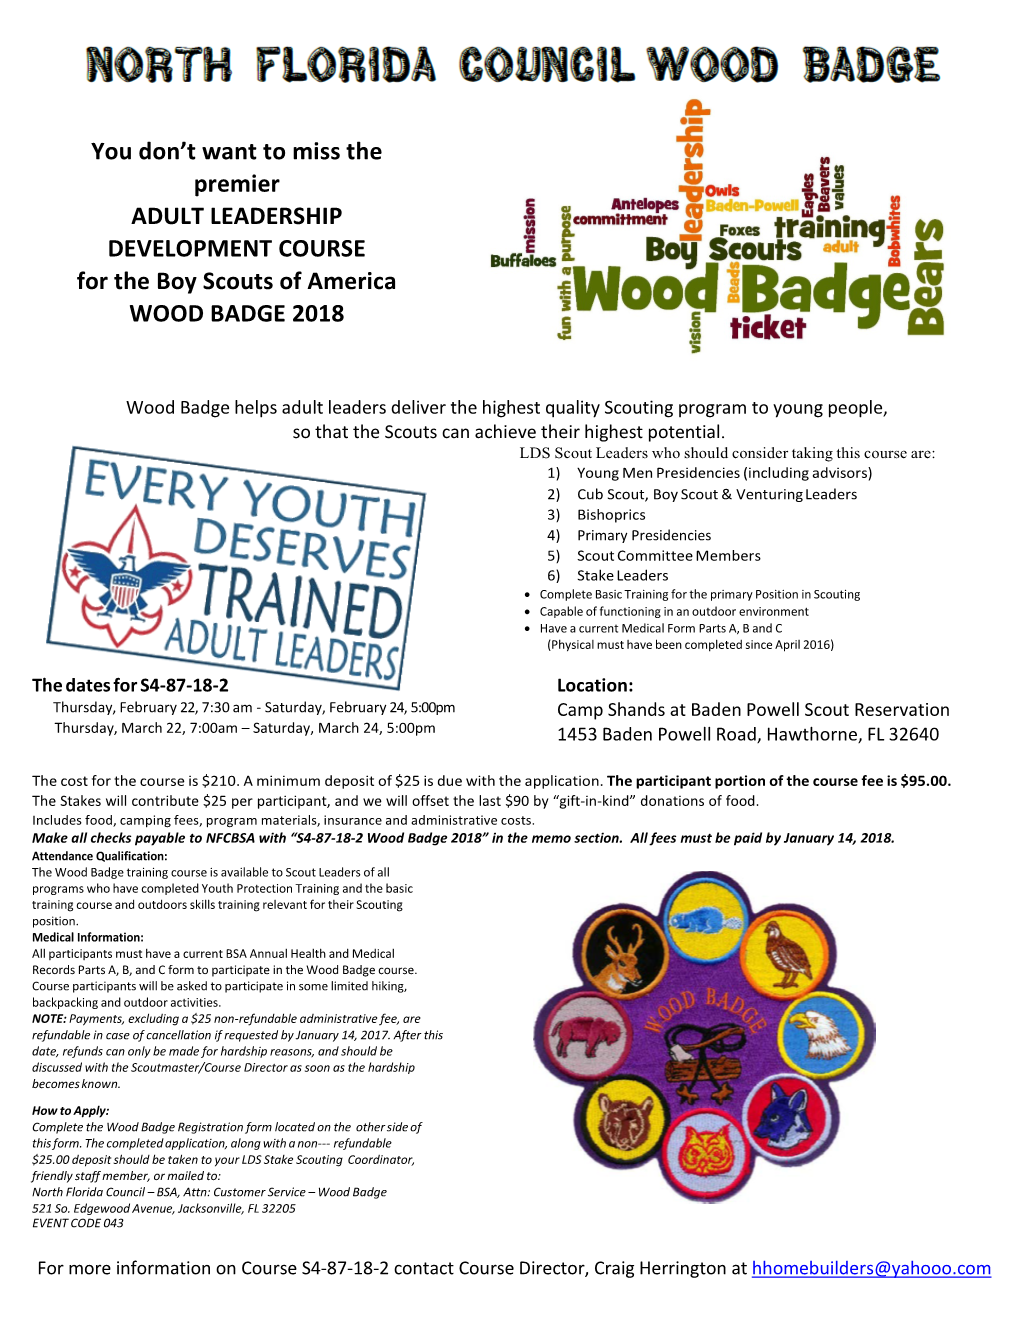 You Don't Want to Miss the Premier ADULT LEADERSHIP DEVELOPMENT COURSE for the Boy Scouts of America WOOD BADGE 2018